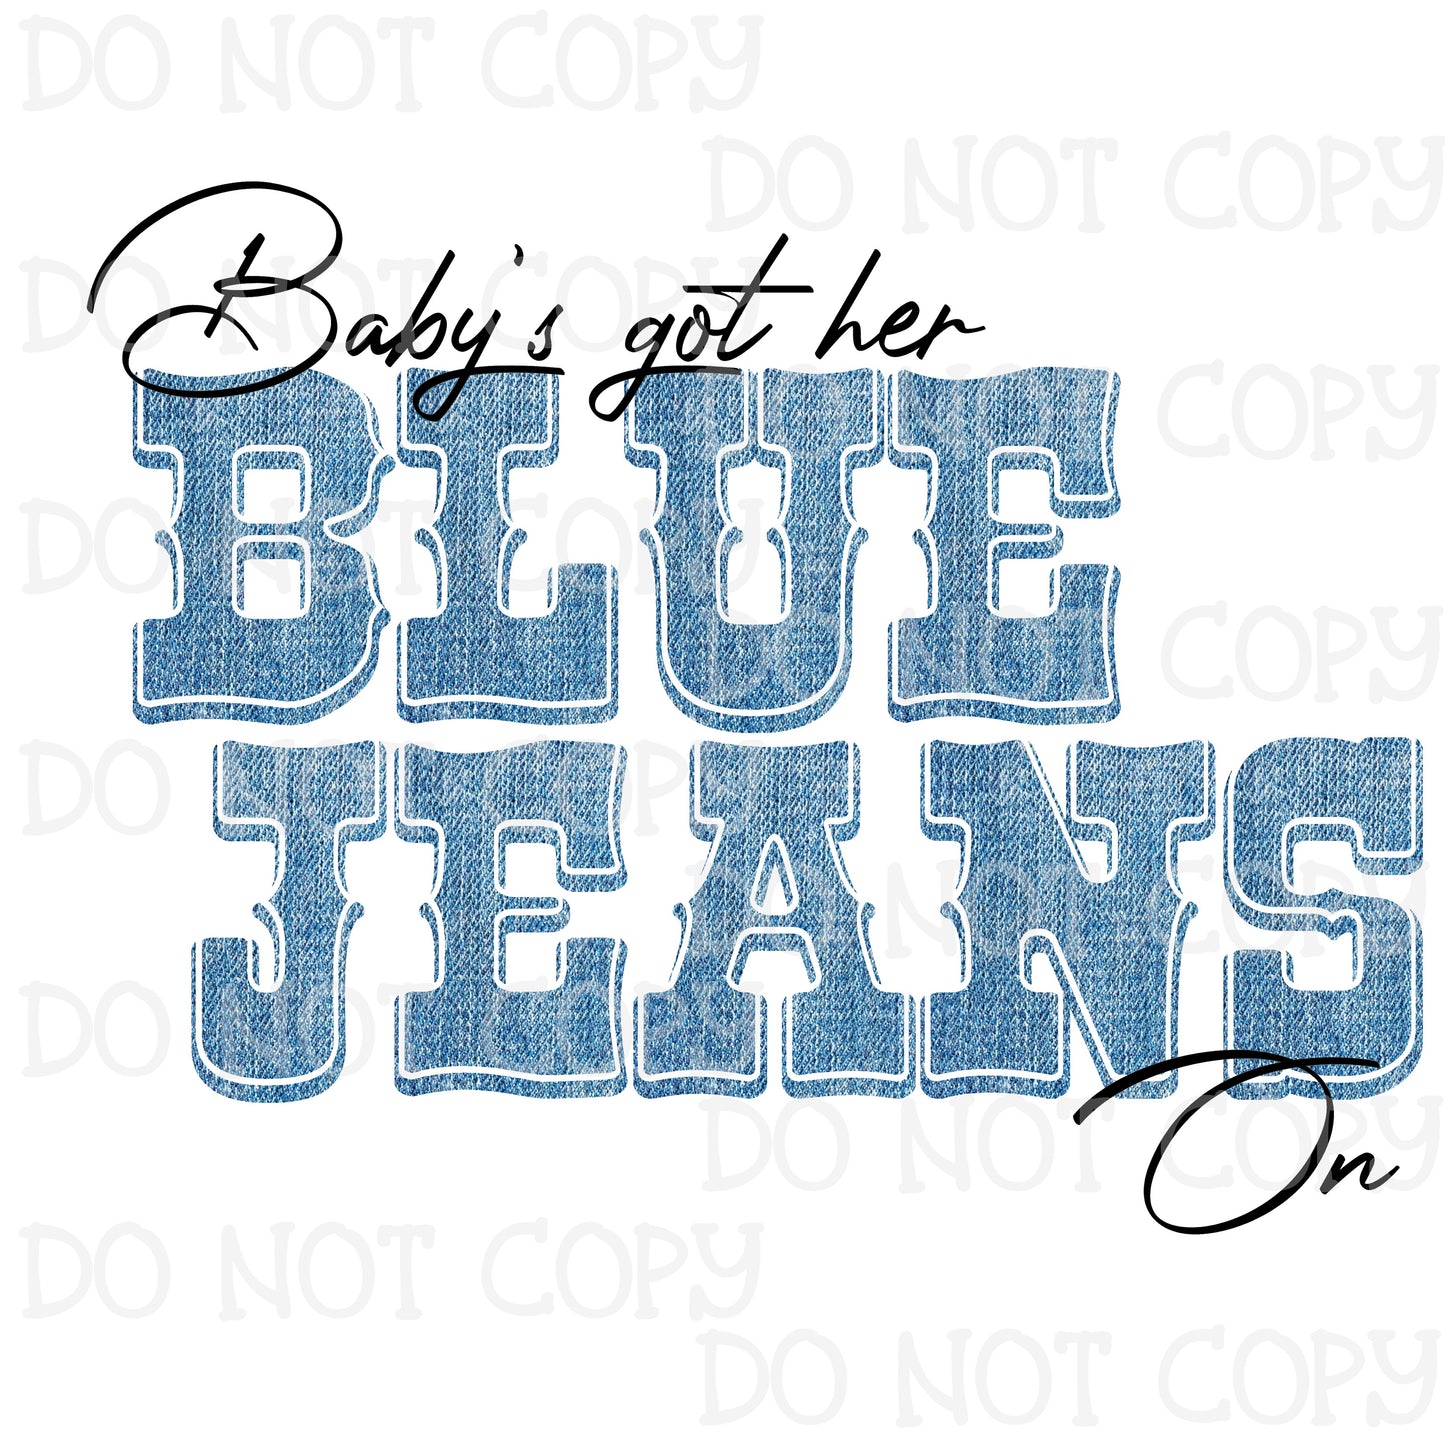 Baby Got Her Blue Jeans On Sublimation Print